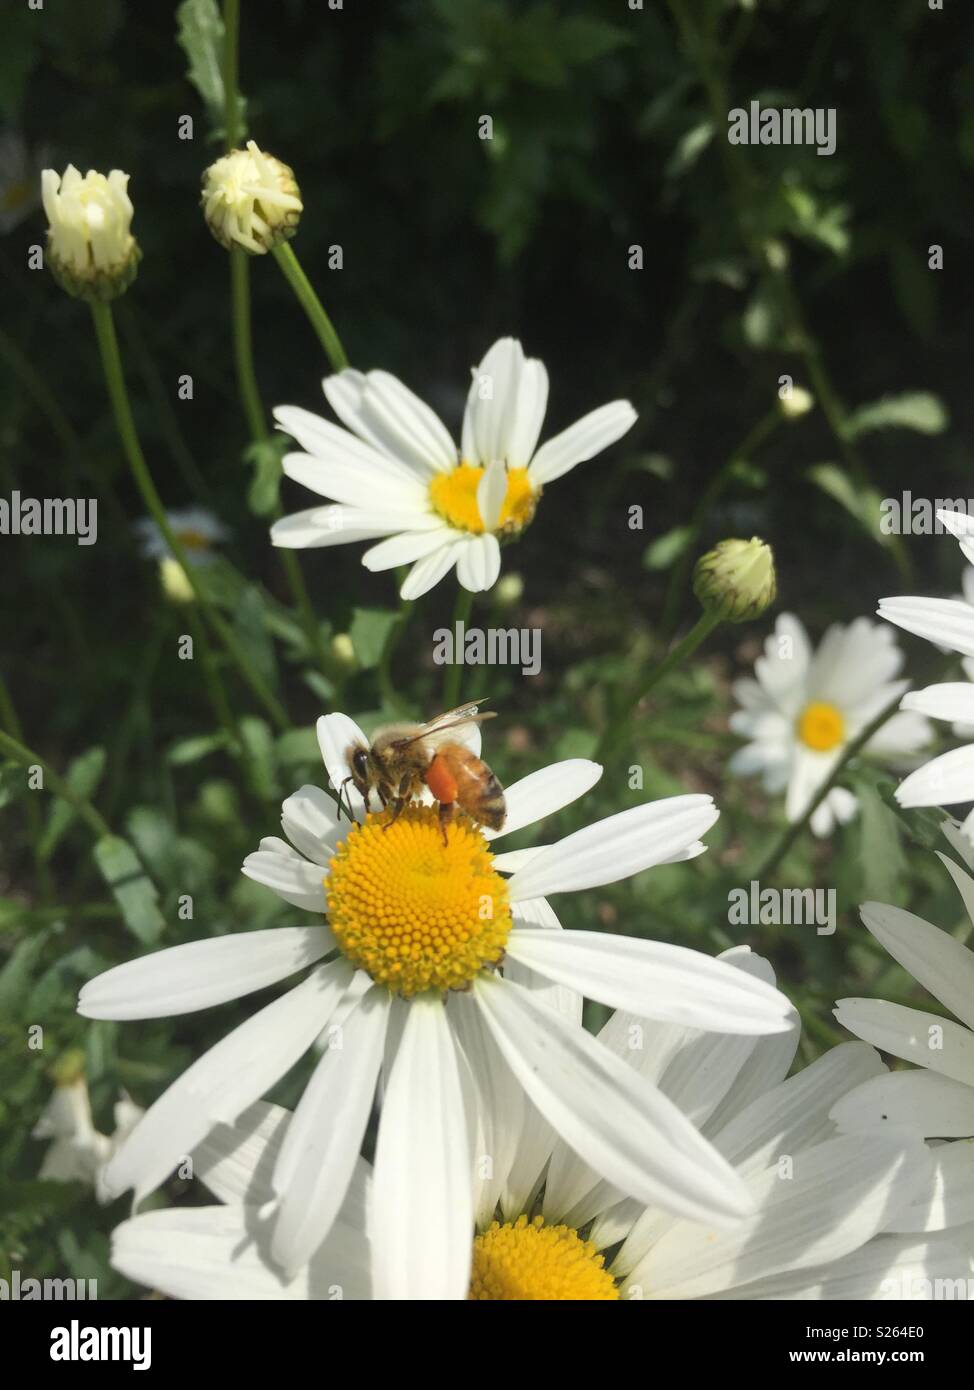 Close up of Daisies Blooming outdoors and honey bee collecting honey Stock Photo